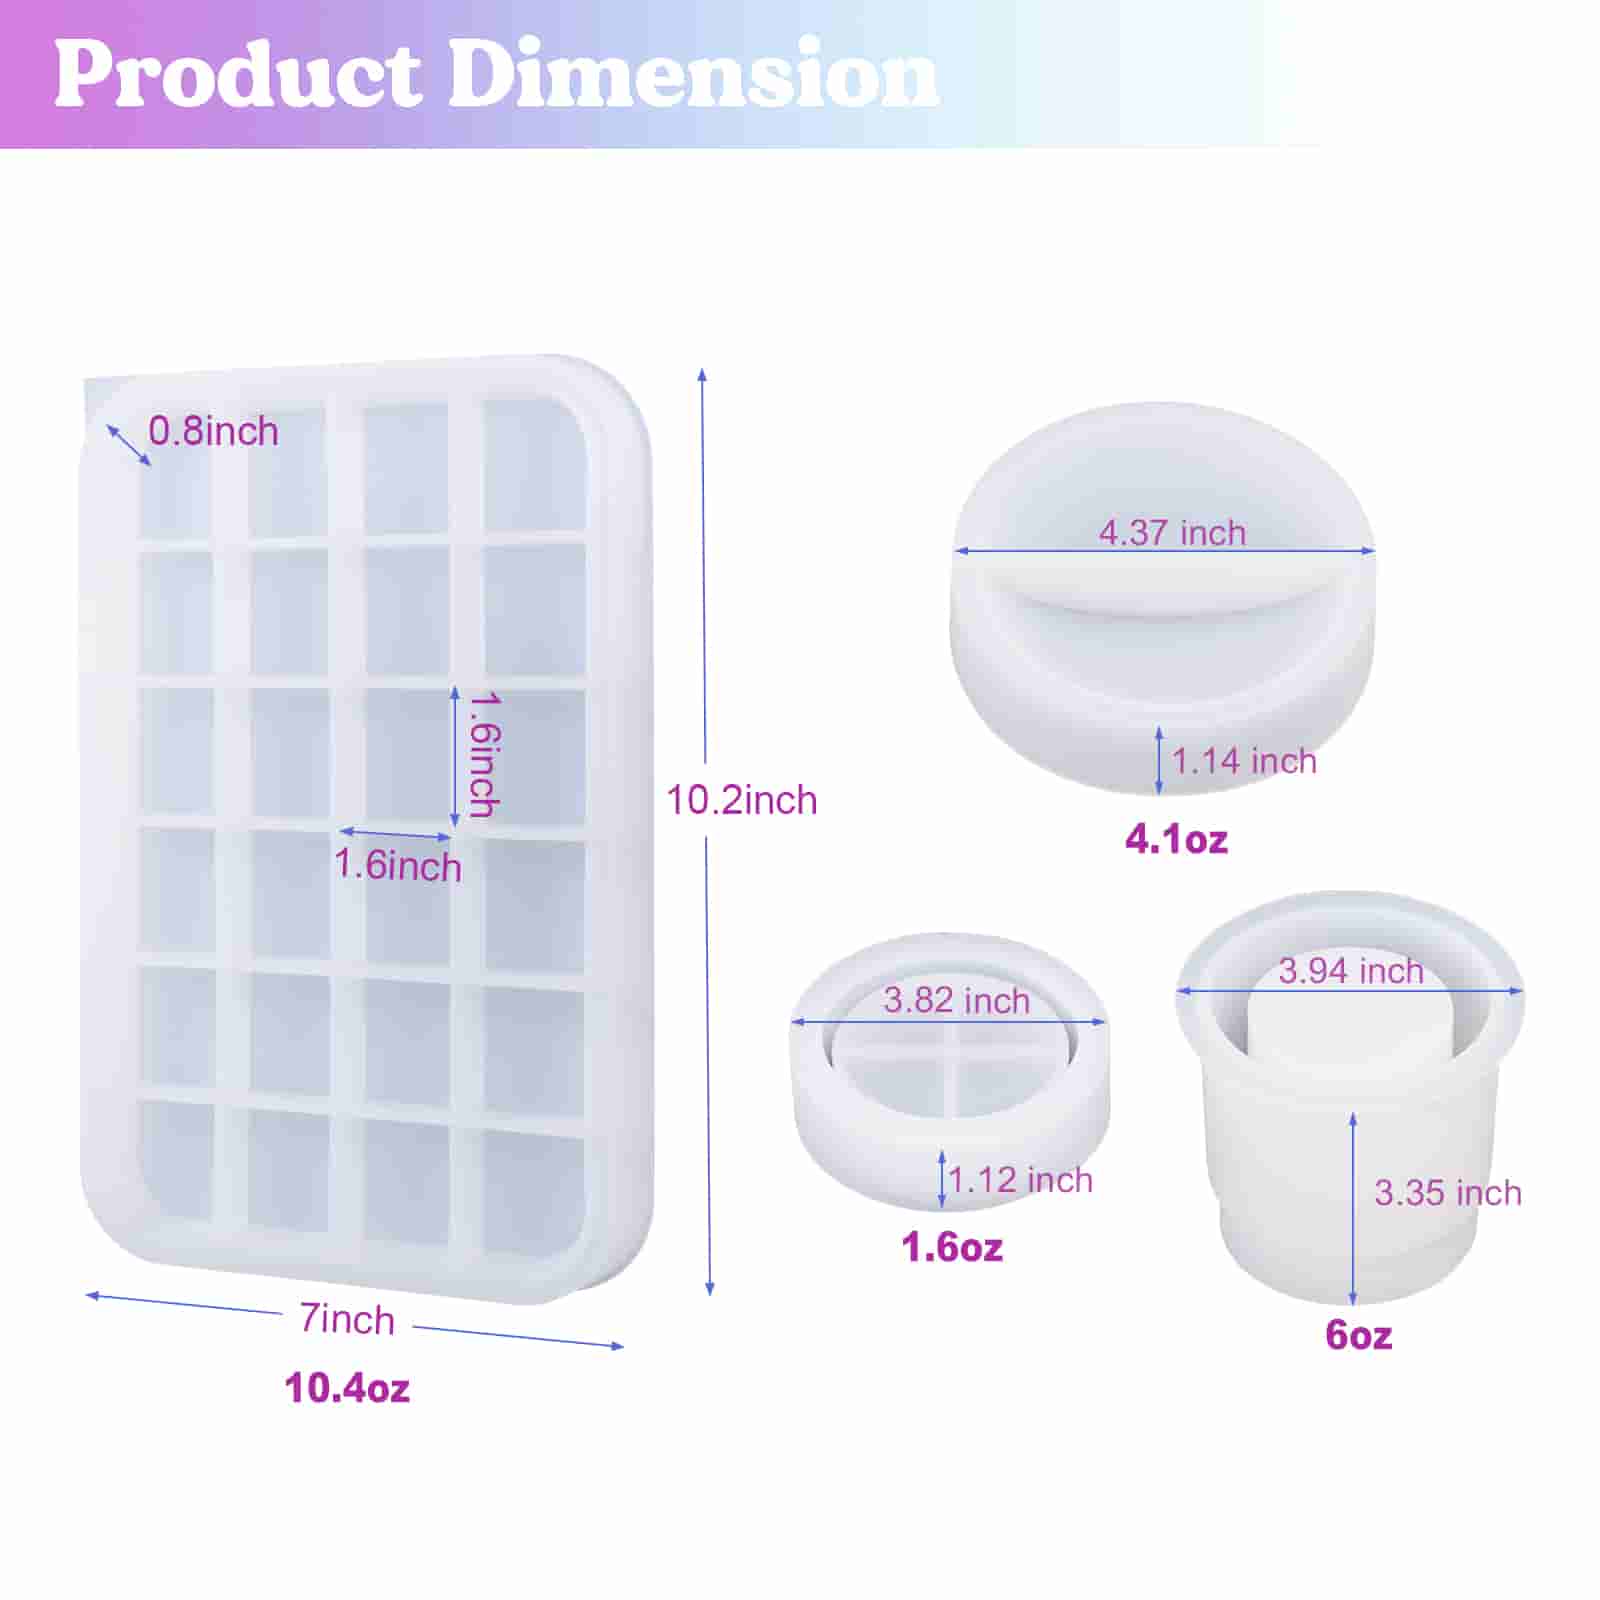 Resin Mold Silicone Kit with Rolling Tray Mold, Ashtray Mold, Jar Mold –  Let's Resin